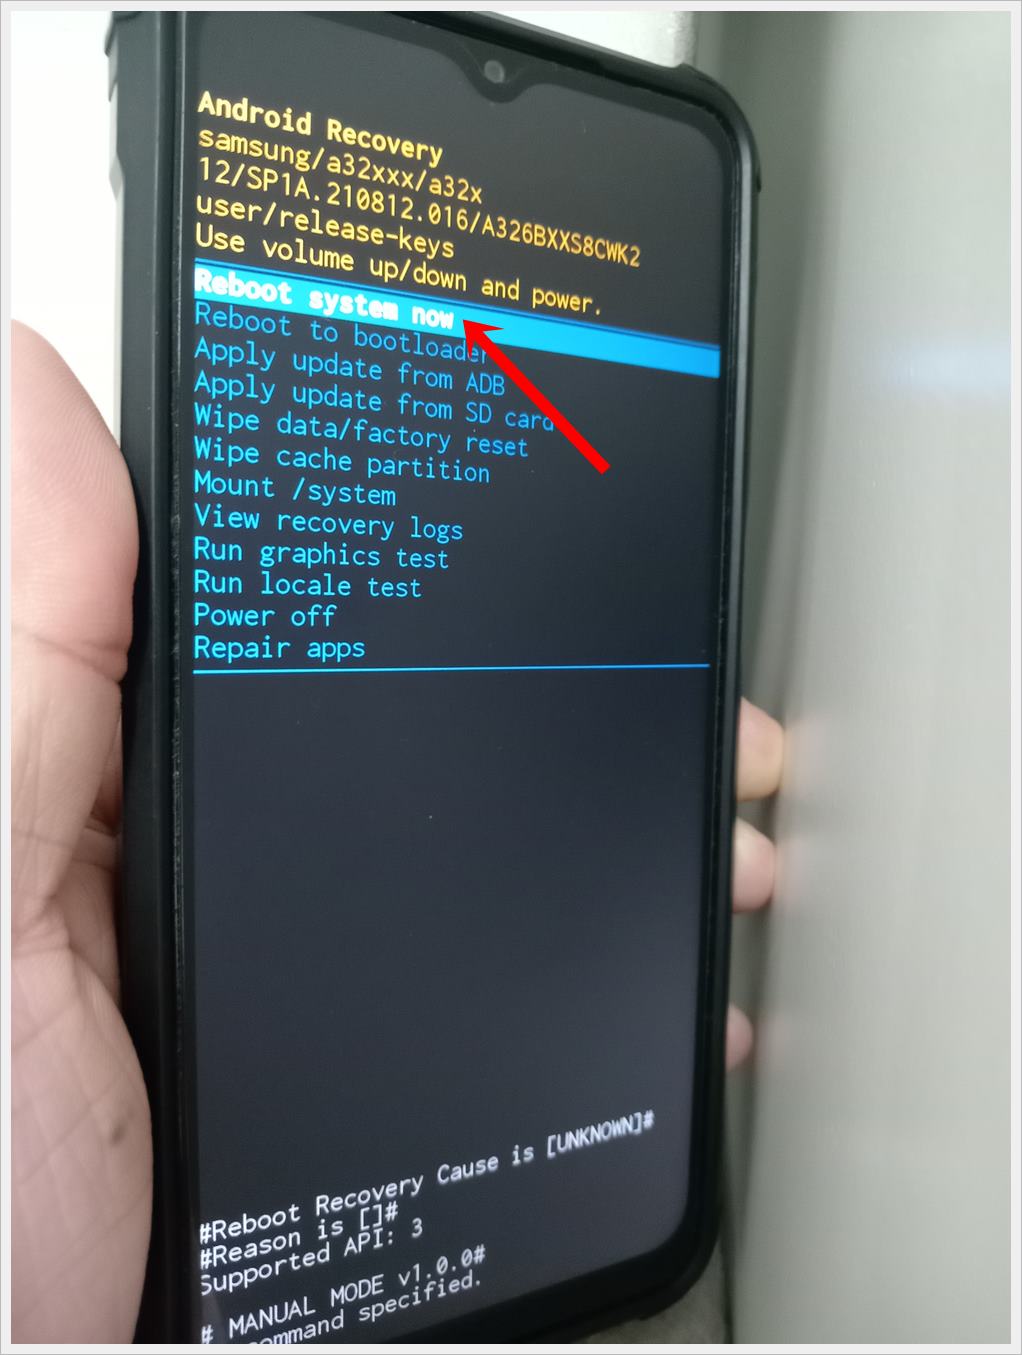 This photo shows a Samsung Galaxy phone displaying the 'Android Recovery' screen with the 'Reboot System Now' option highlighted.